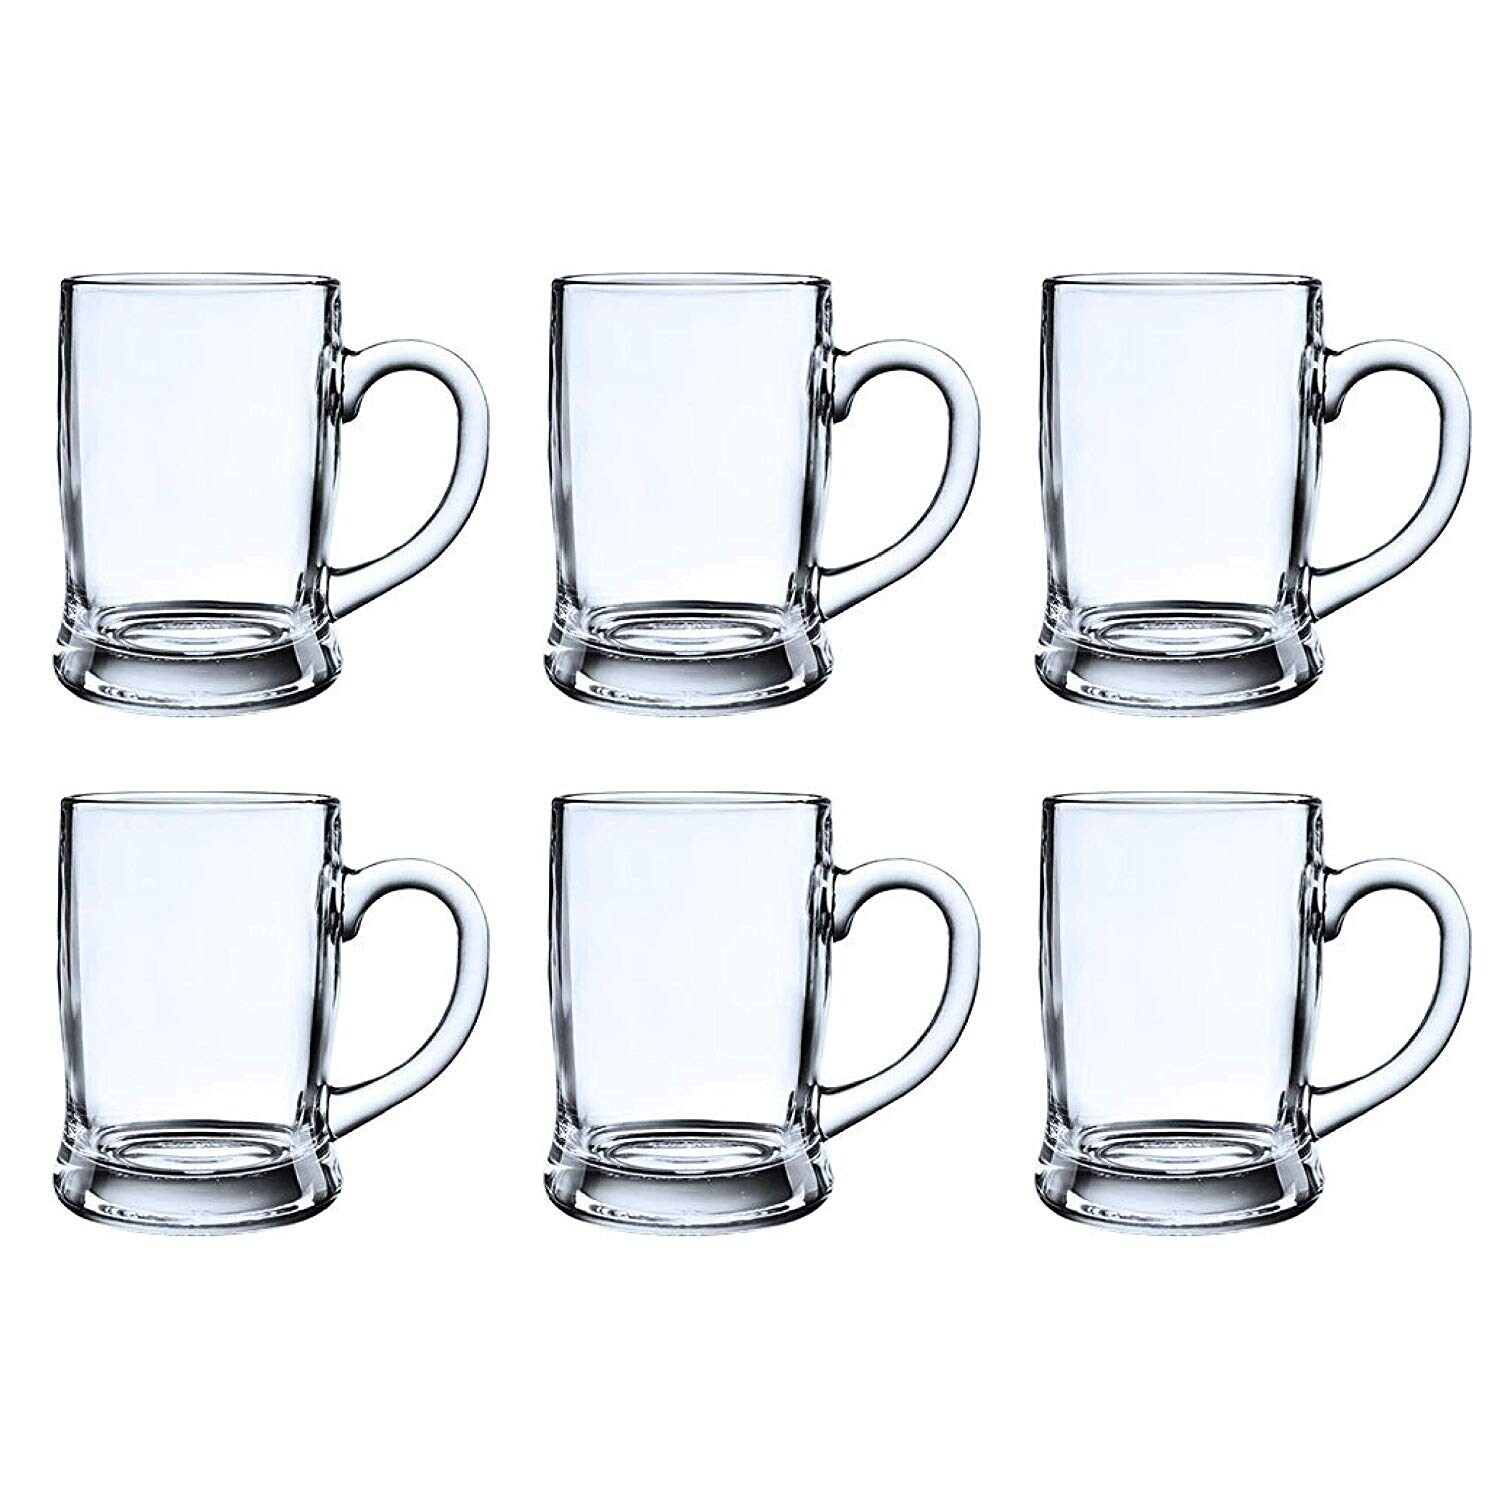 https://ak1.ostkcdn.com/images/products/30259649/Heavy-Base-Beer-Mugs-Fun-Party-Entertainment-Beverage-Drinking-Glassware-13-oz-Crystal-Style-Glass-Lead-Pb-Free-4968bfe0-ea86-42f6-81cc-3bbb037888f0.jpg